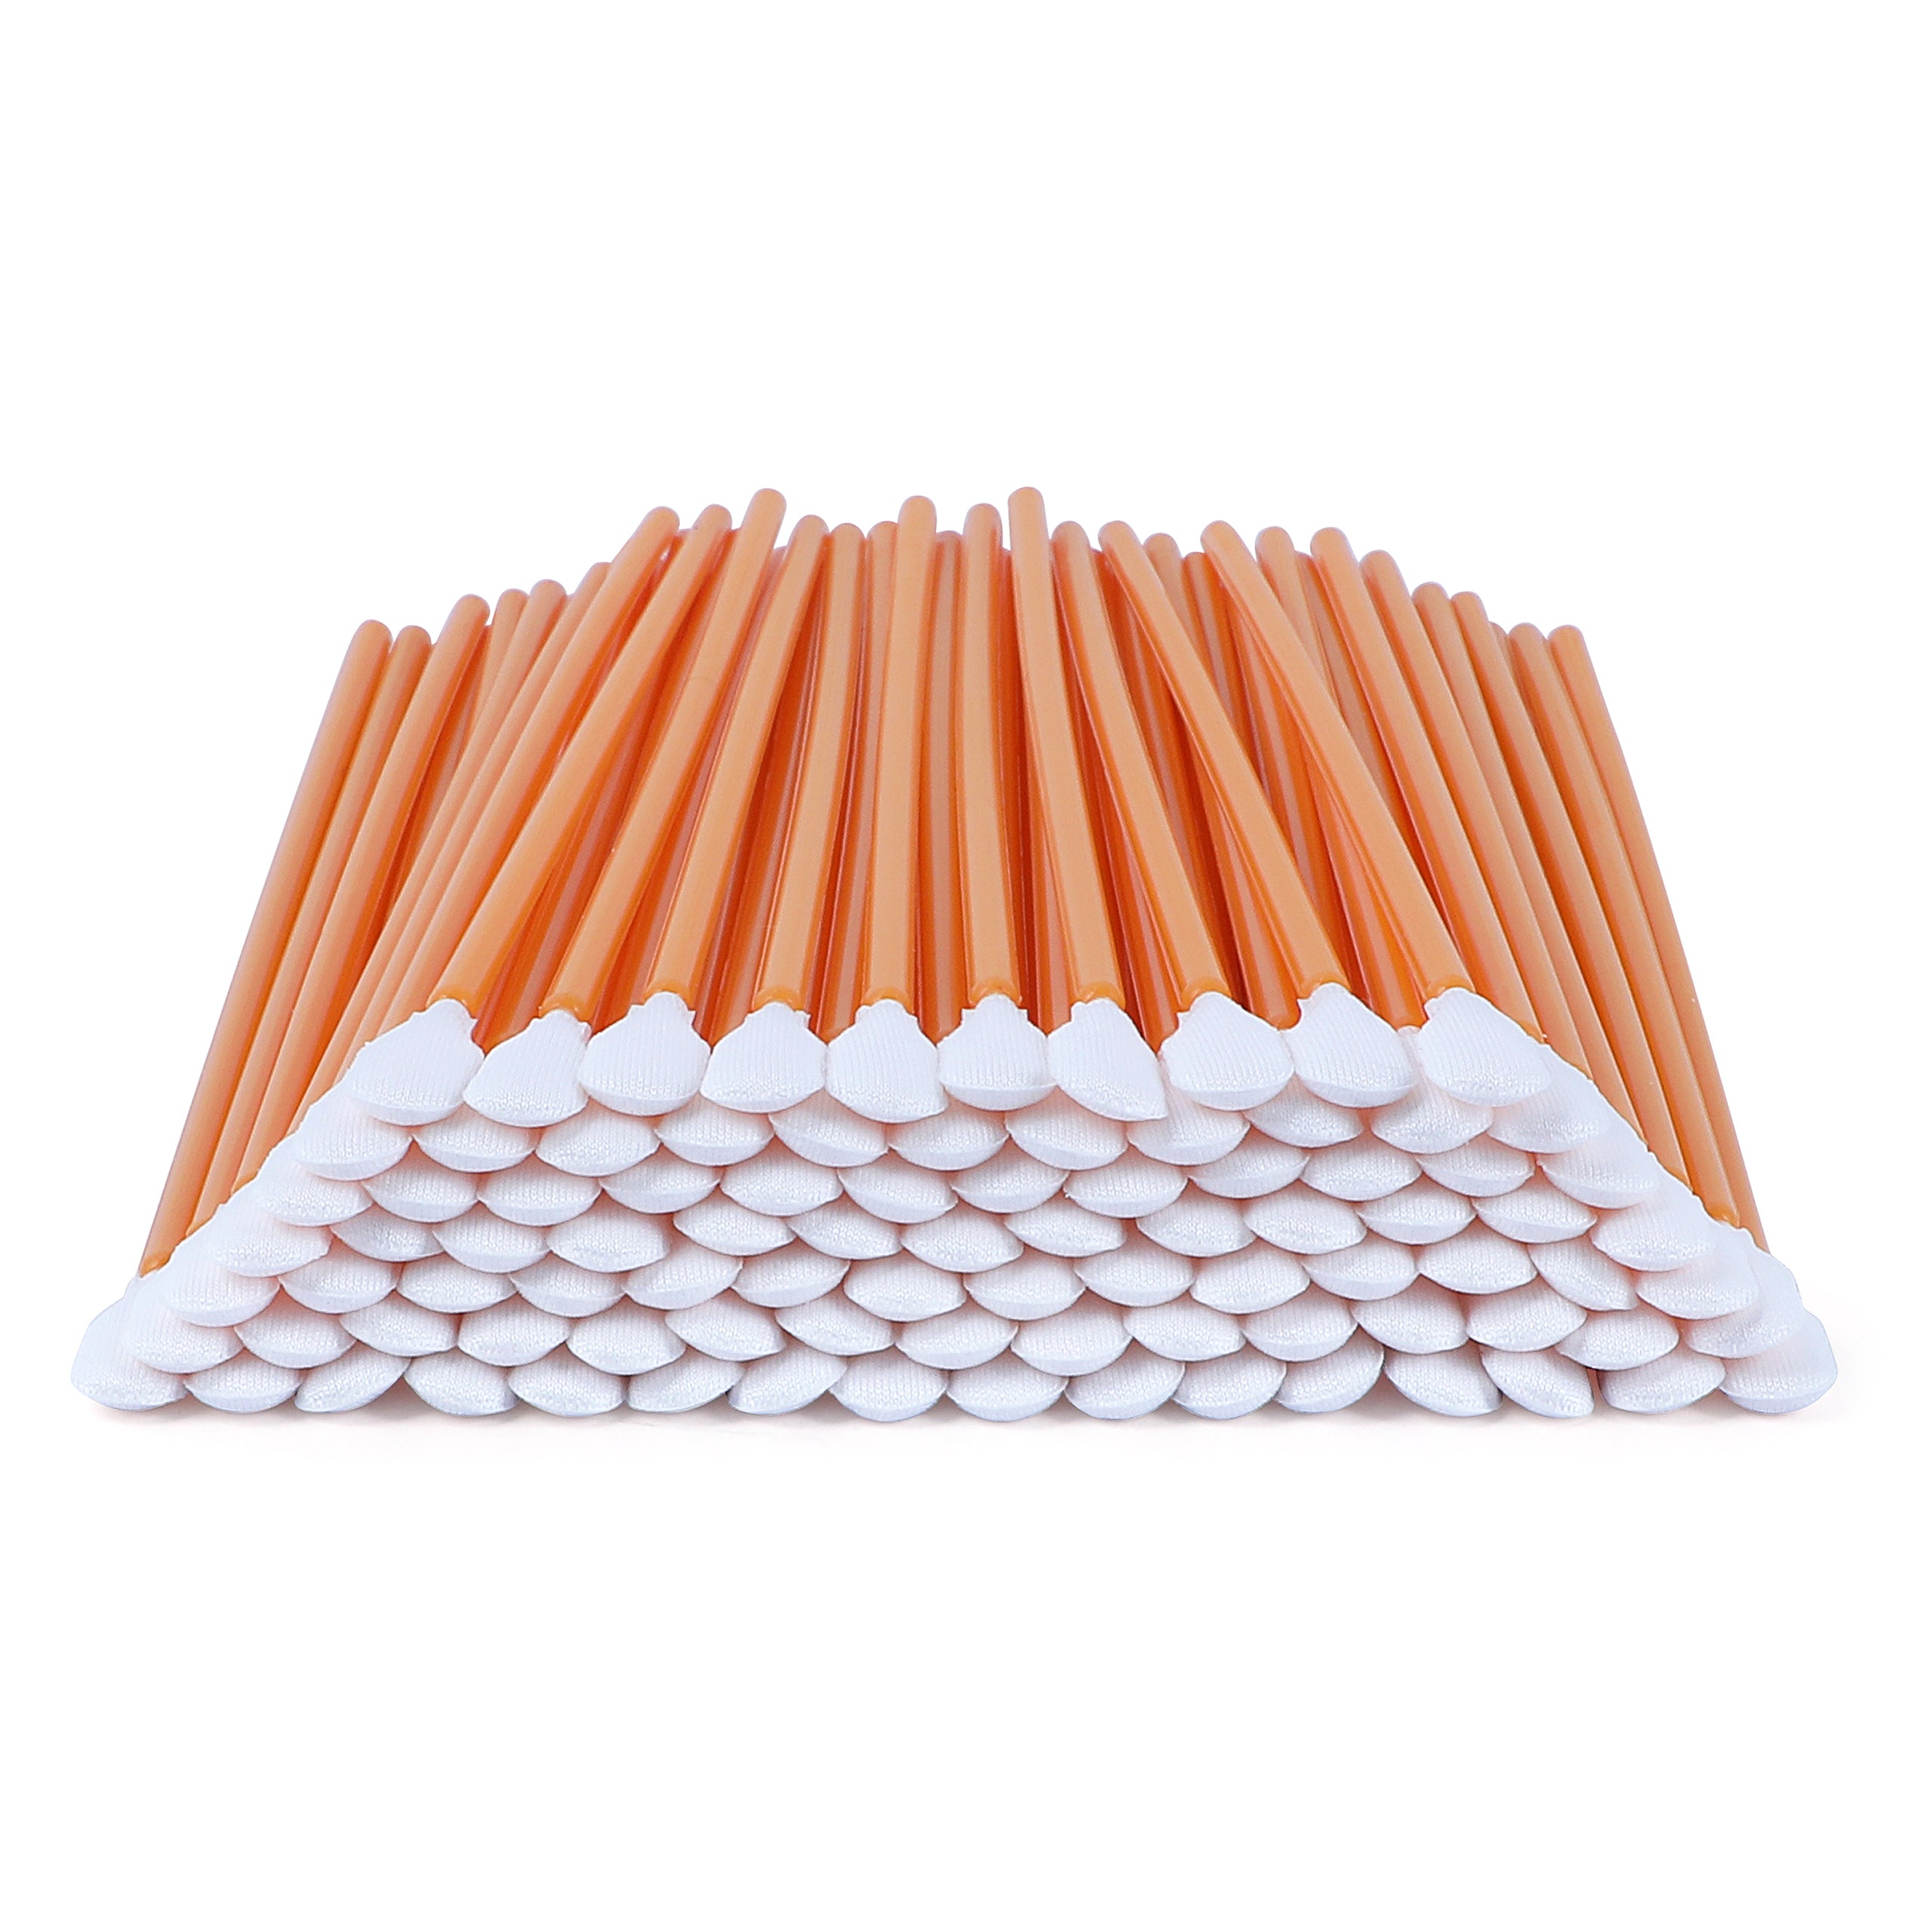 4" Paddle Head Narrow Space Cleaning Swabs  (1,000 pcs, Orange, Length/Swab Head Width=100 mm/6.8 mm) Knitted Polyester Cleanroom Foam Cleaning electronic lint-free Lens Swab Stick for Cleaning Optical Equipment(A7147A)